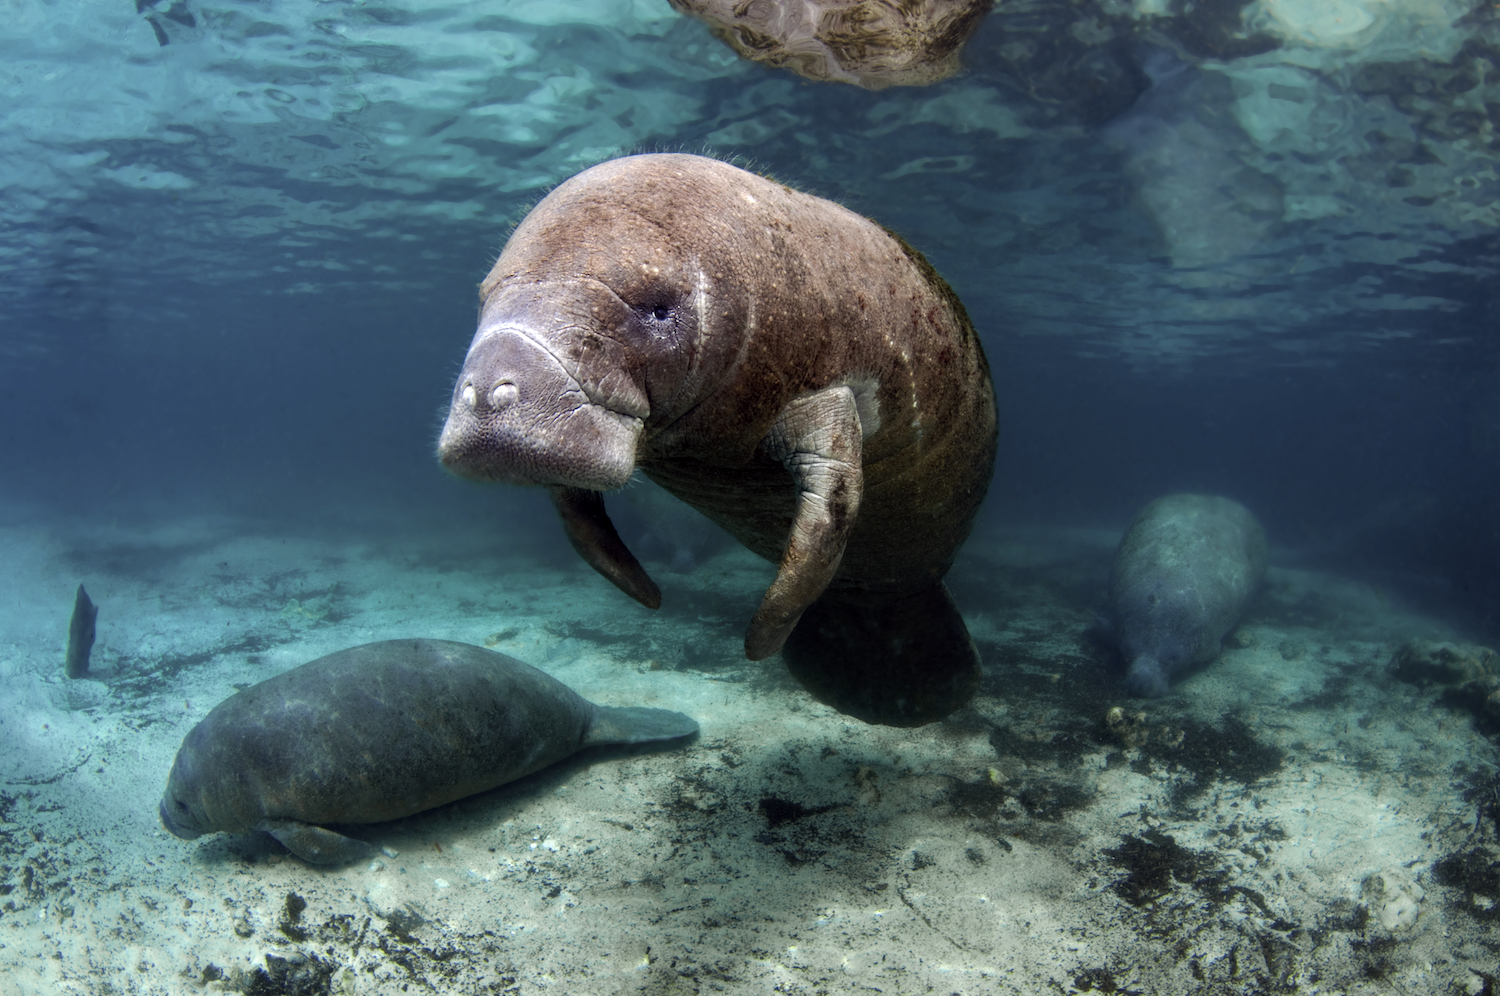 Manatees coming up close in Crystal River, which is one of the main attractions when diving in Florida in January